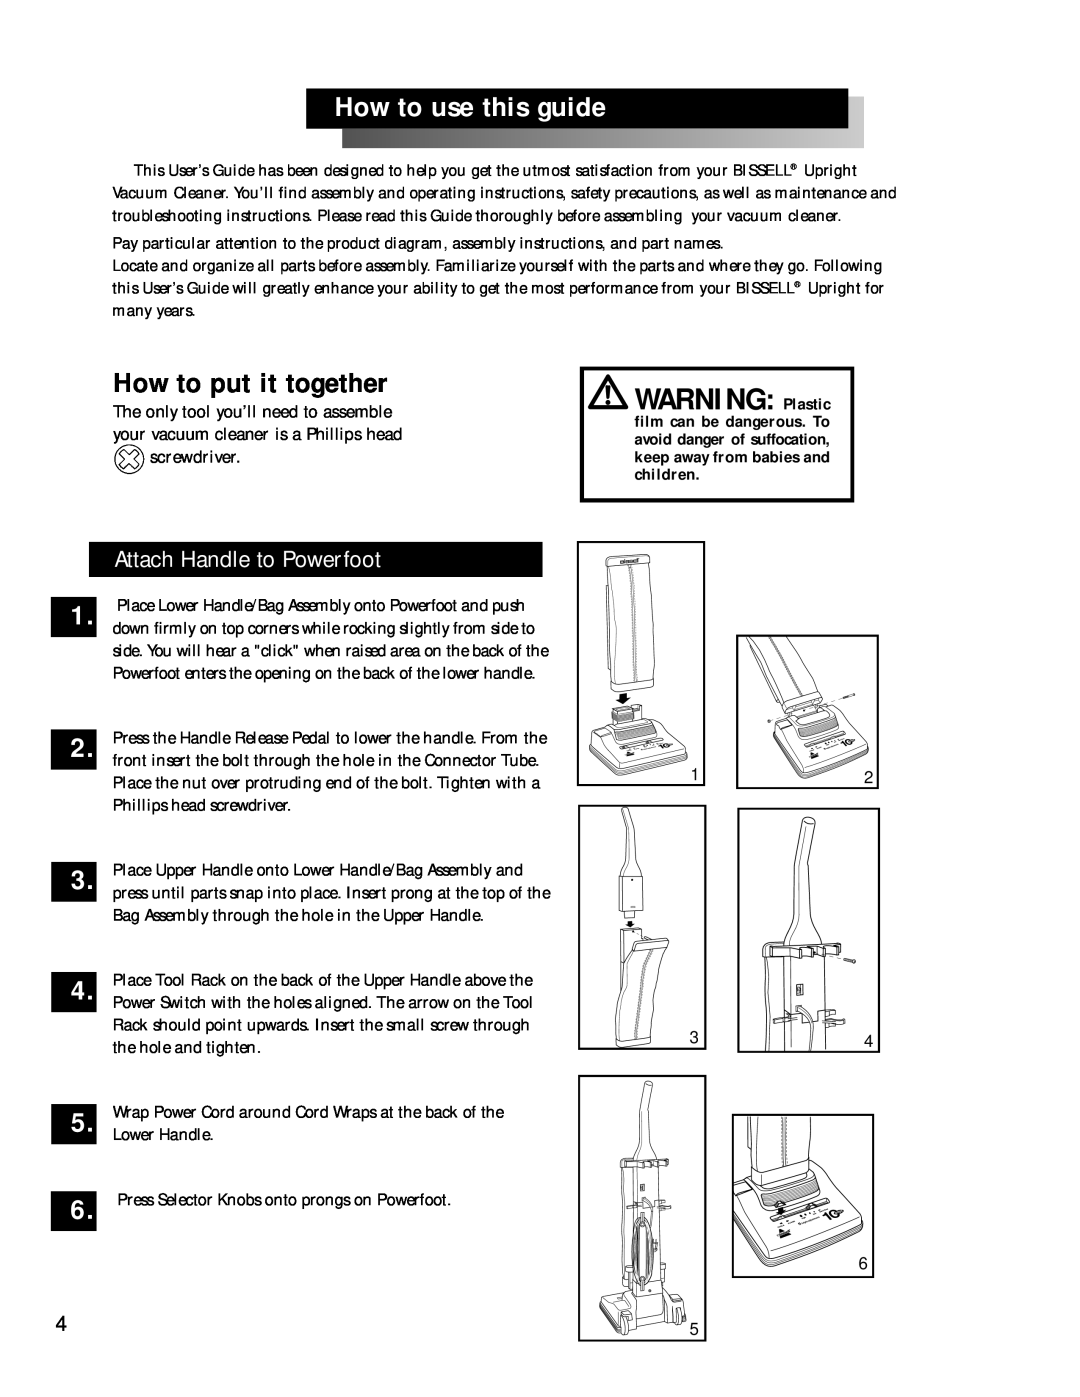 Bissell 3512 warranty WARNING Plastic, How to use this guide, How to put it together, Attach Handle to Powerfoot 